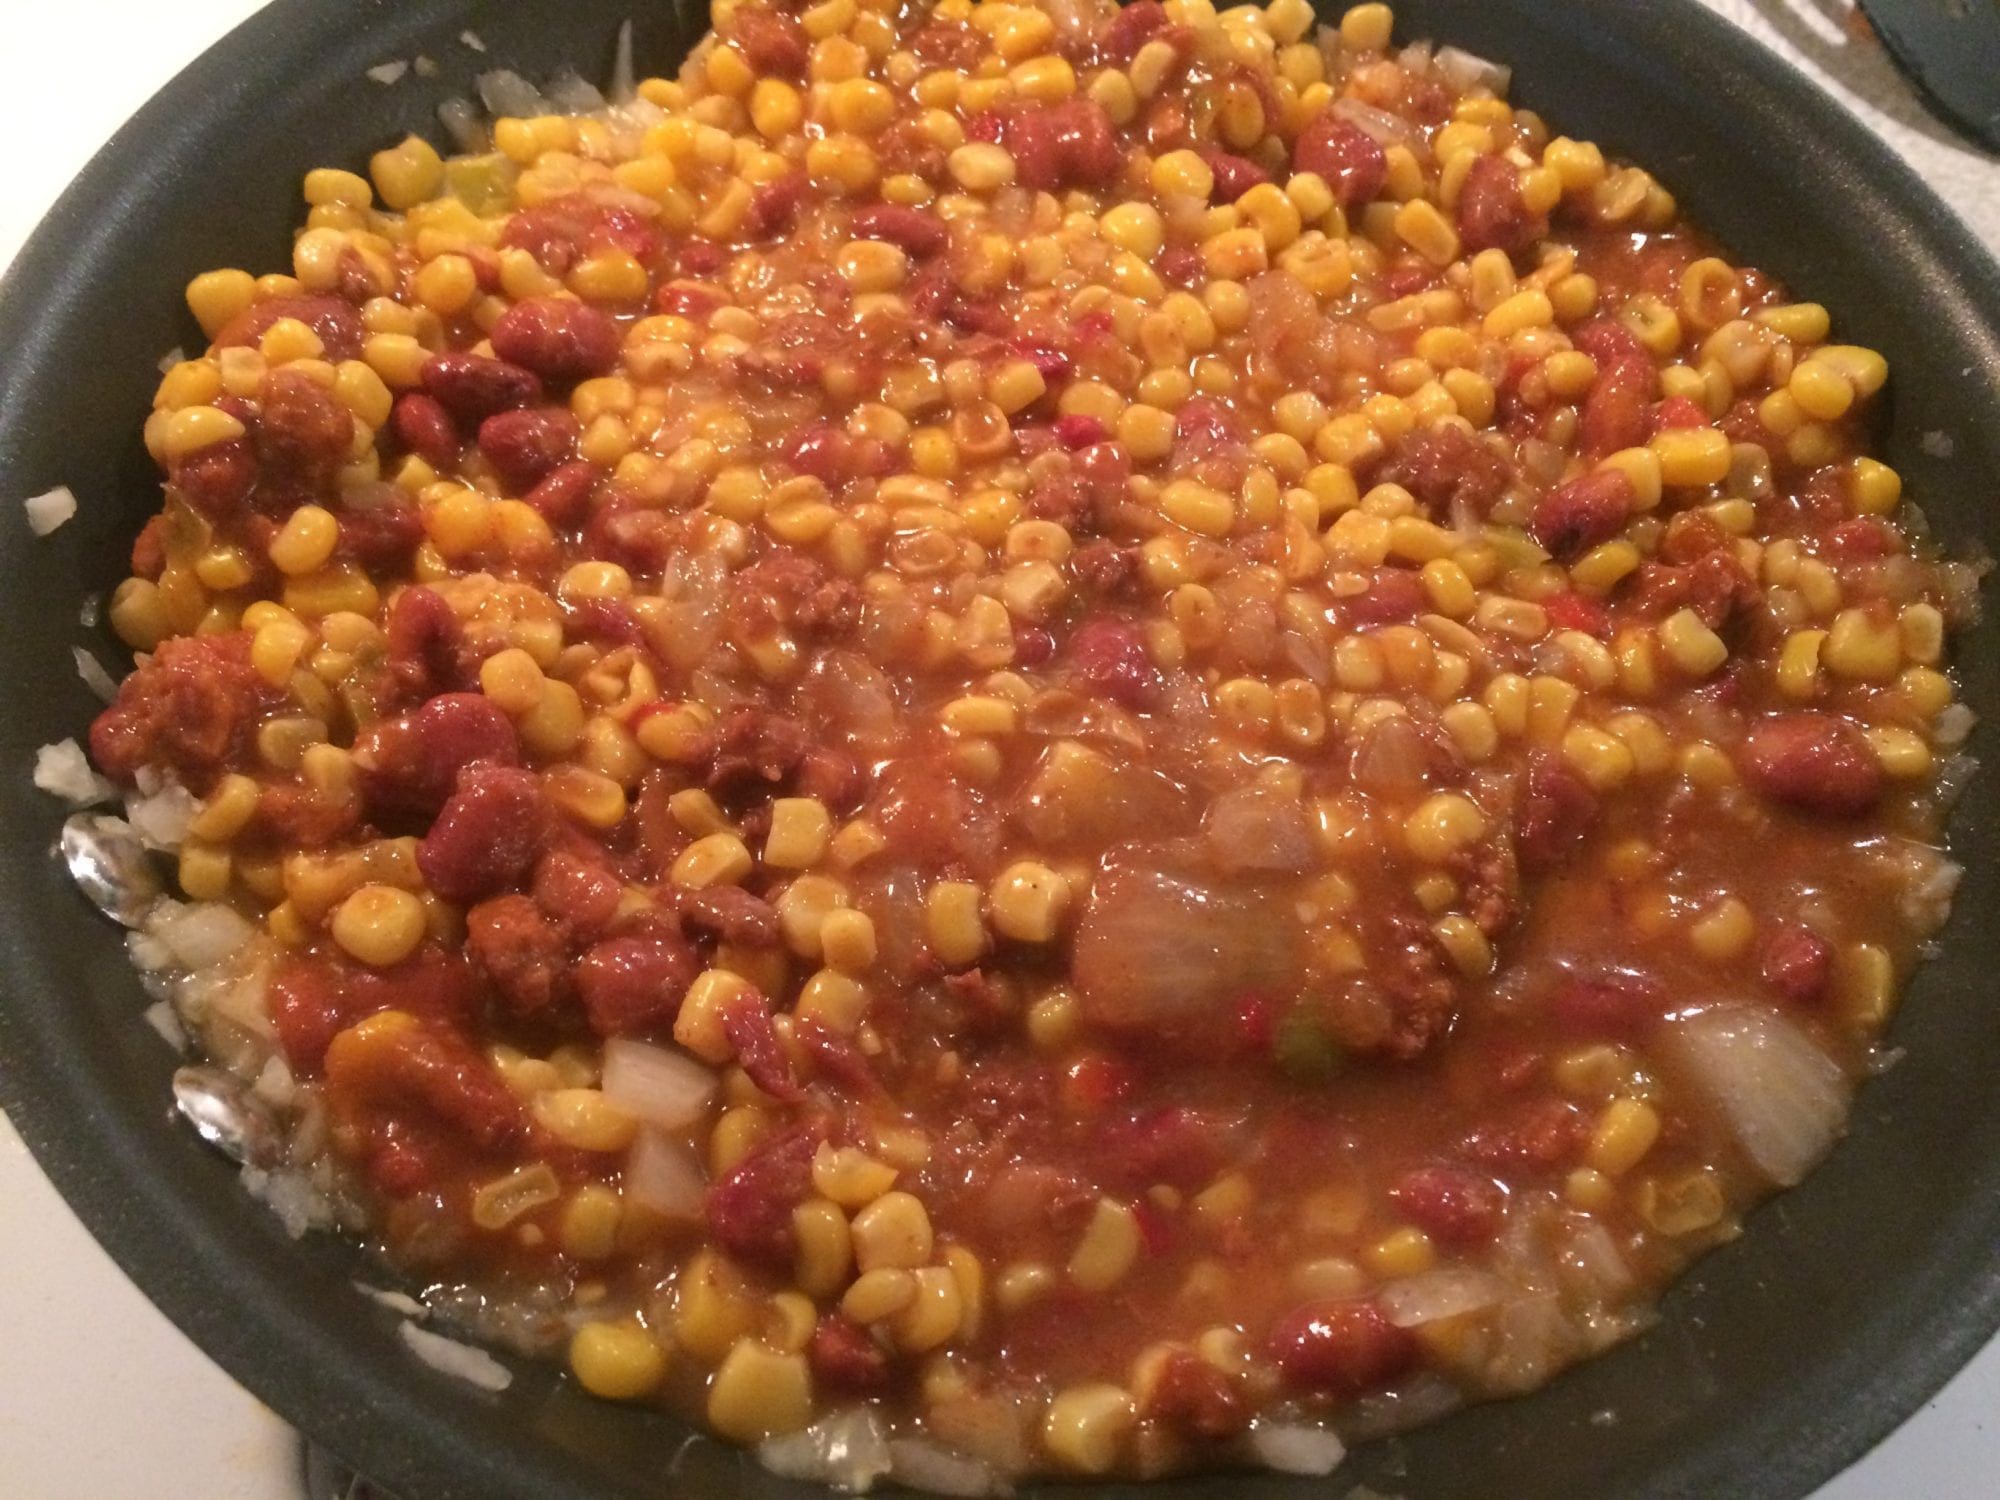 Sprinkled cheese on Mexican canned corn for chili cornbread casserole.